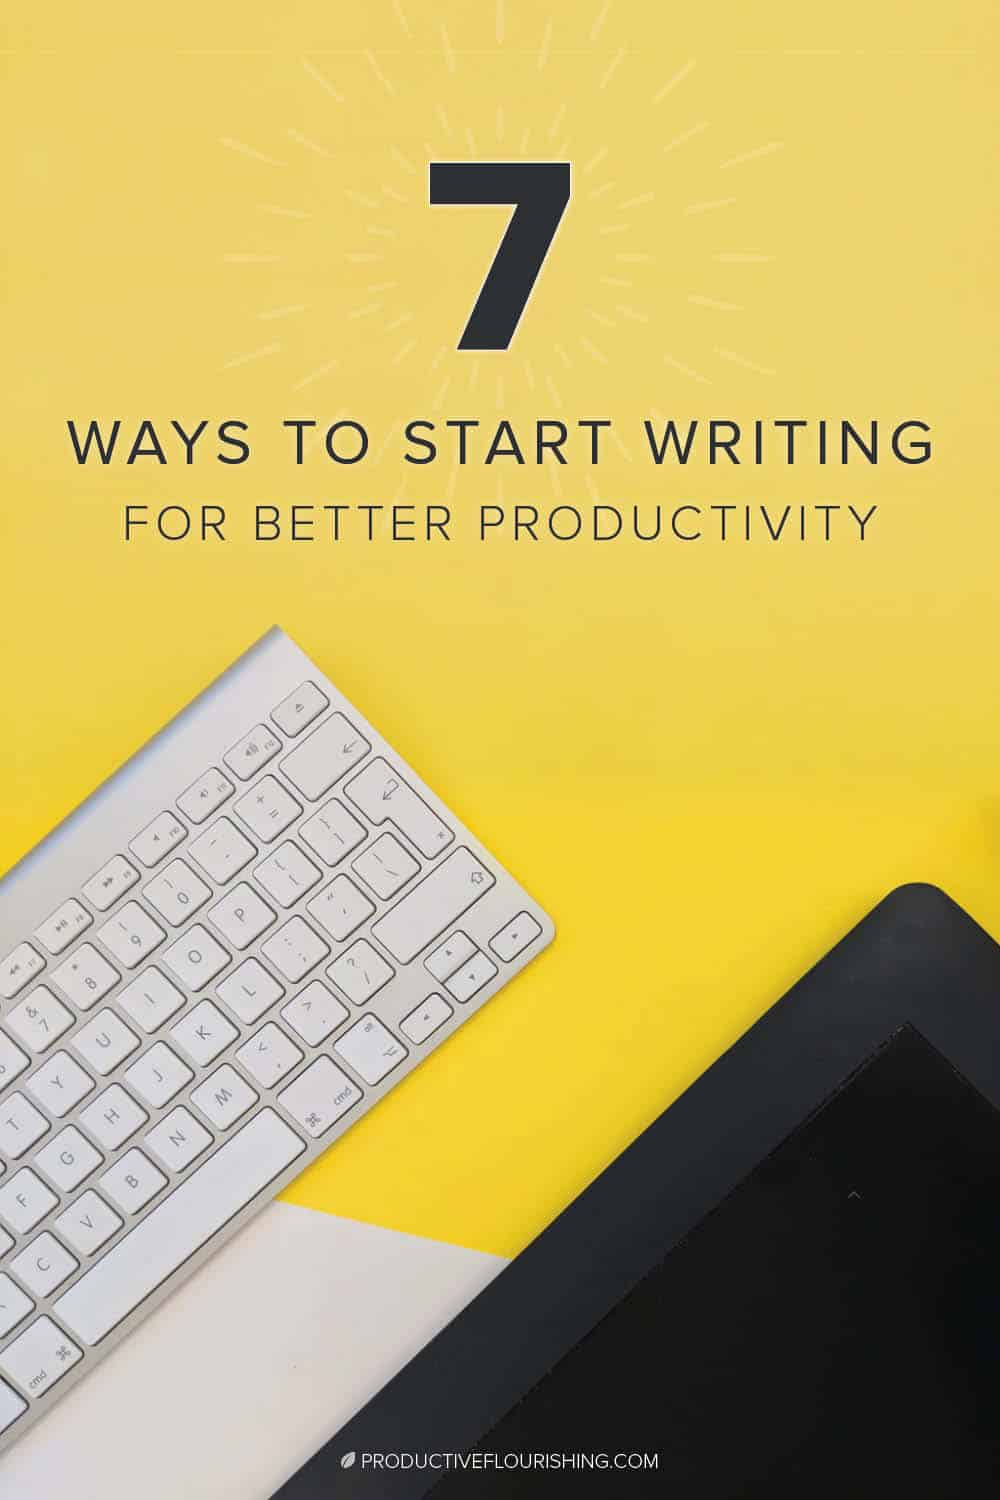 The act of writing is inherently mindful, bringing small business owners into a state of awareness. Even with the clearest of goals and intentions, entrepreneurs can find that it’s all too easy to get distracted and end up accomplishing very little. Here are 7 ways you can start writing to improve your business productivity. #businessproductivity #smallbusinessowner #productiveflourishing